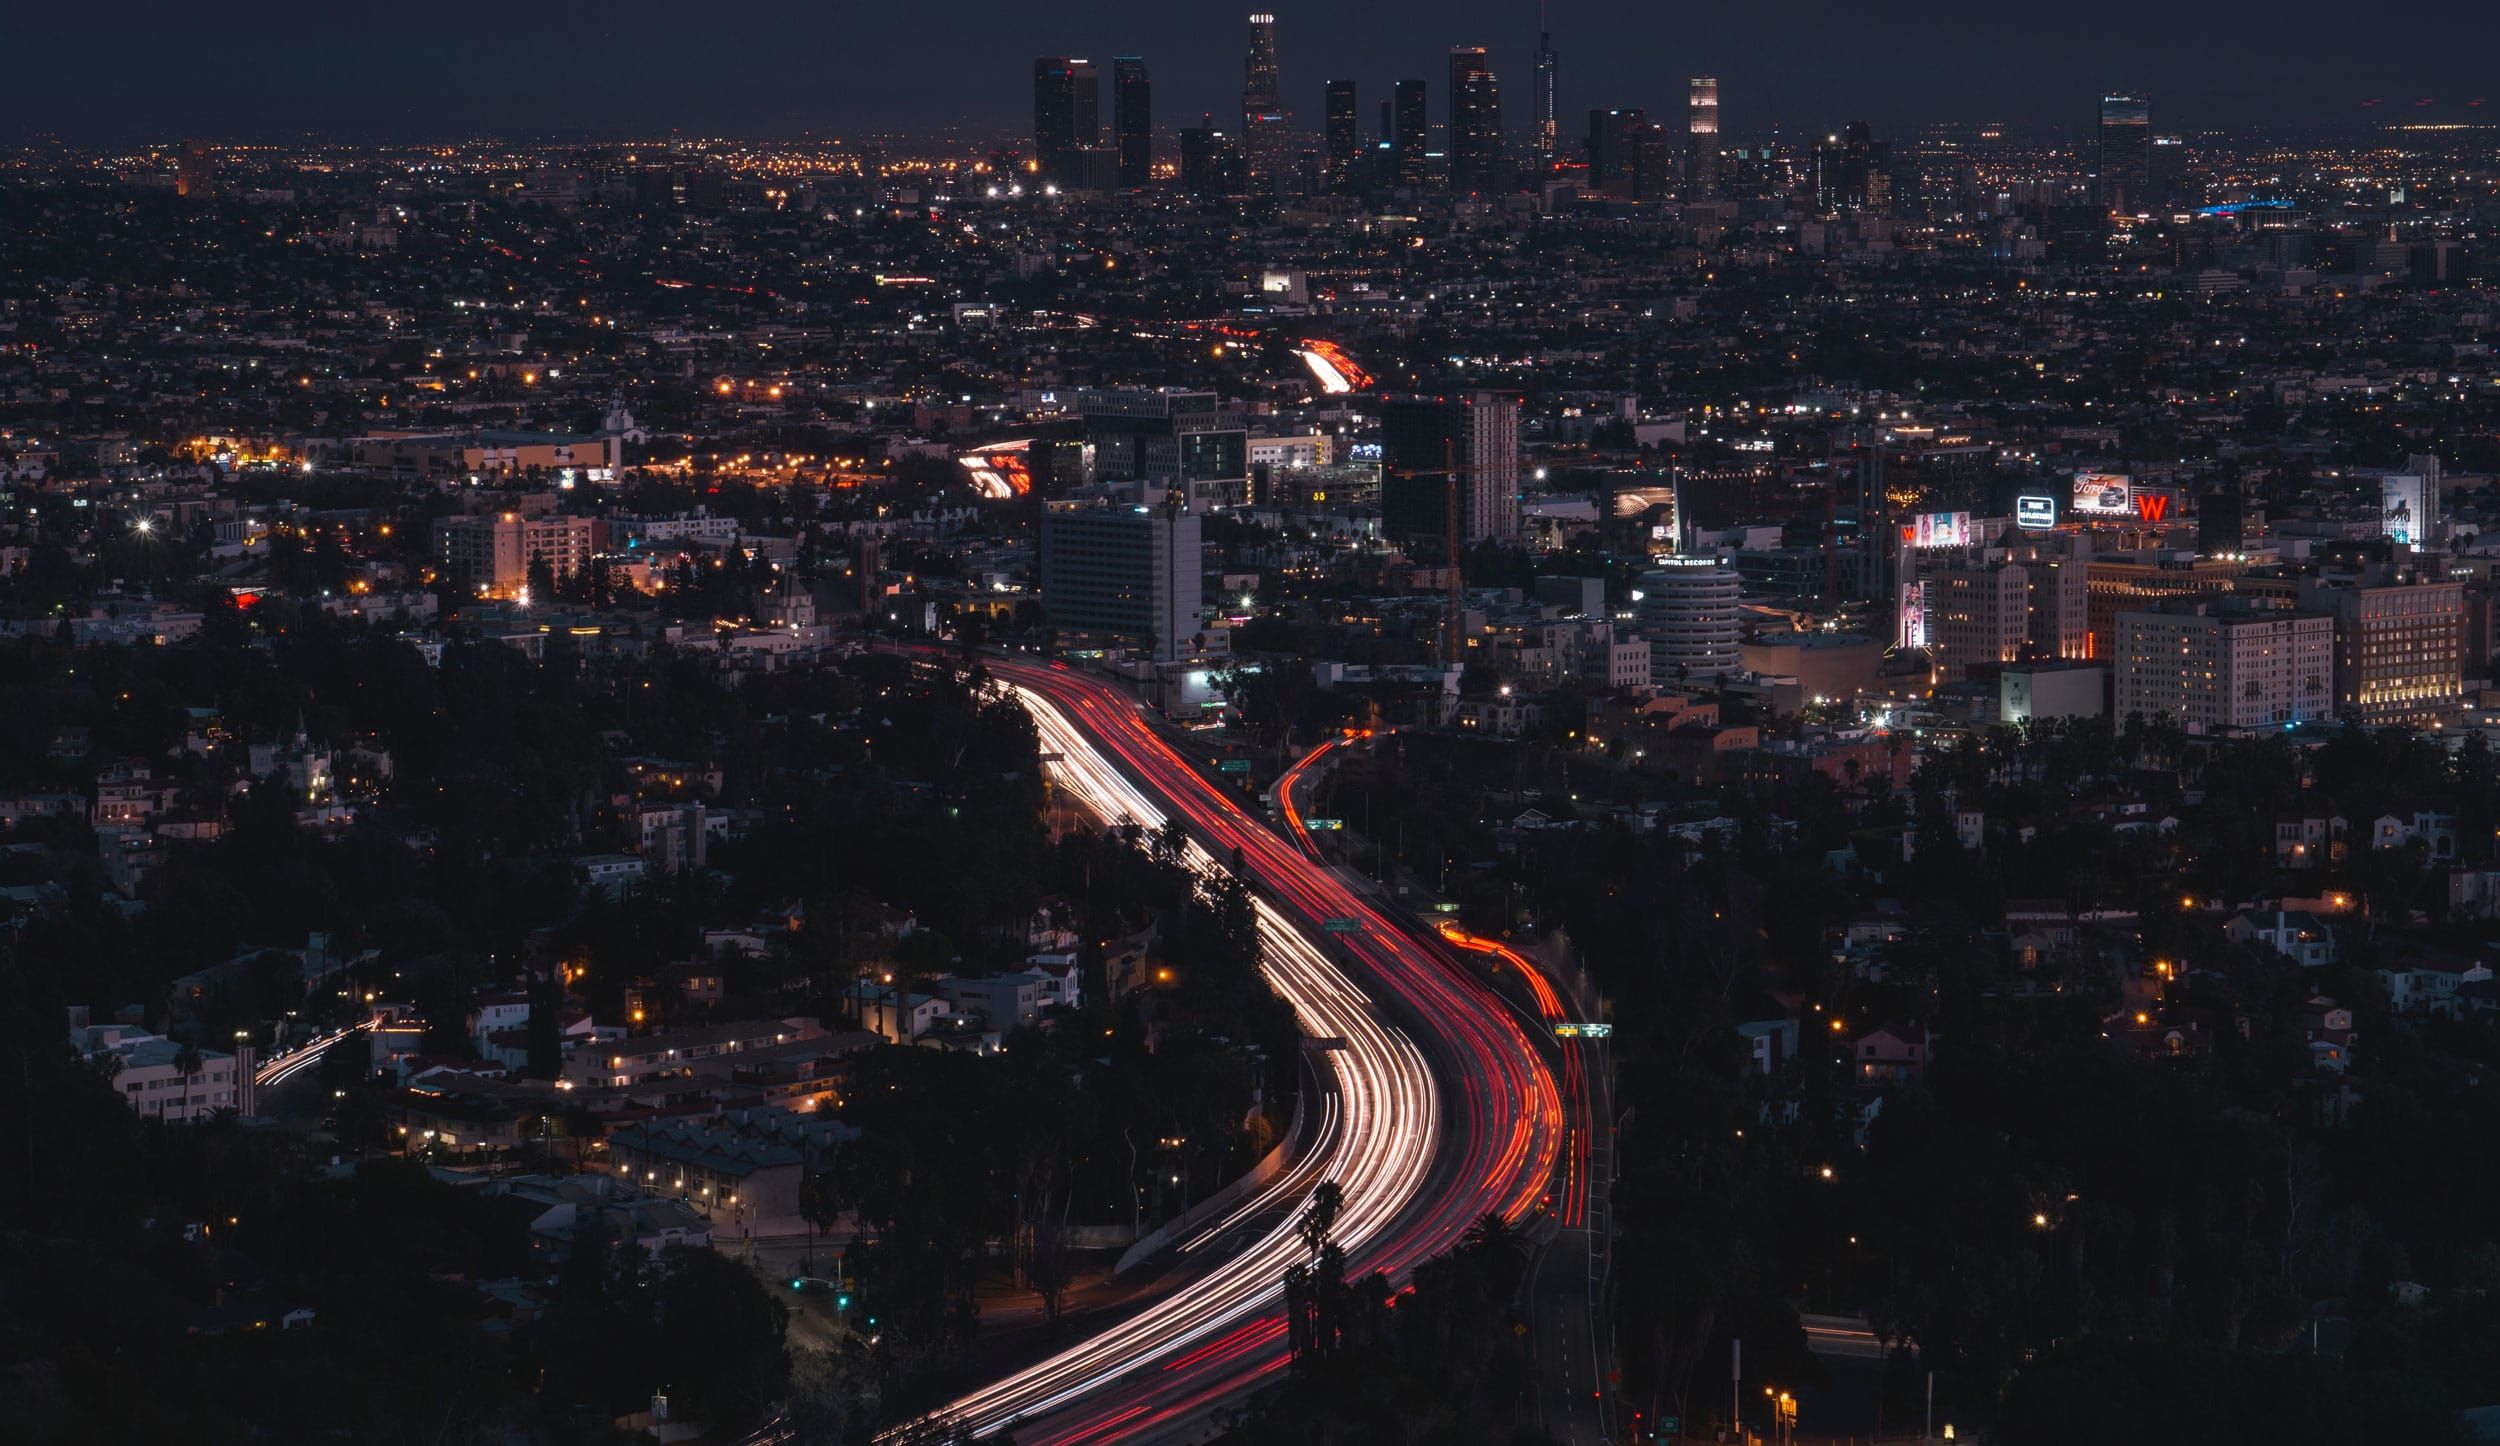 Los Angeles skyline at night, showing lights of cars traveling along the freeway.